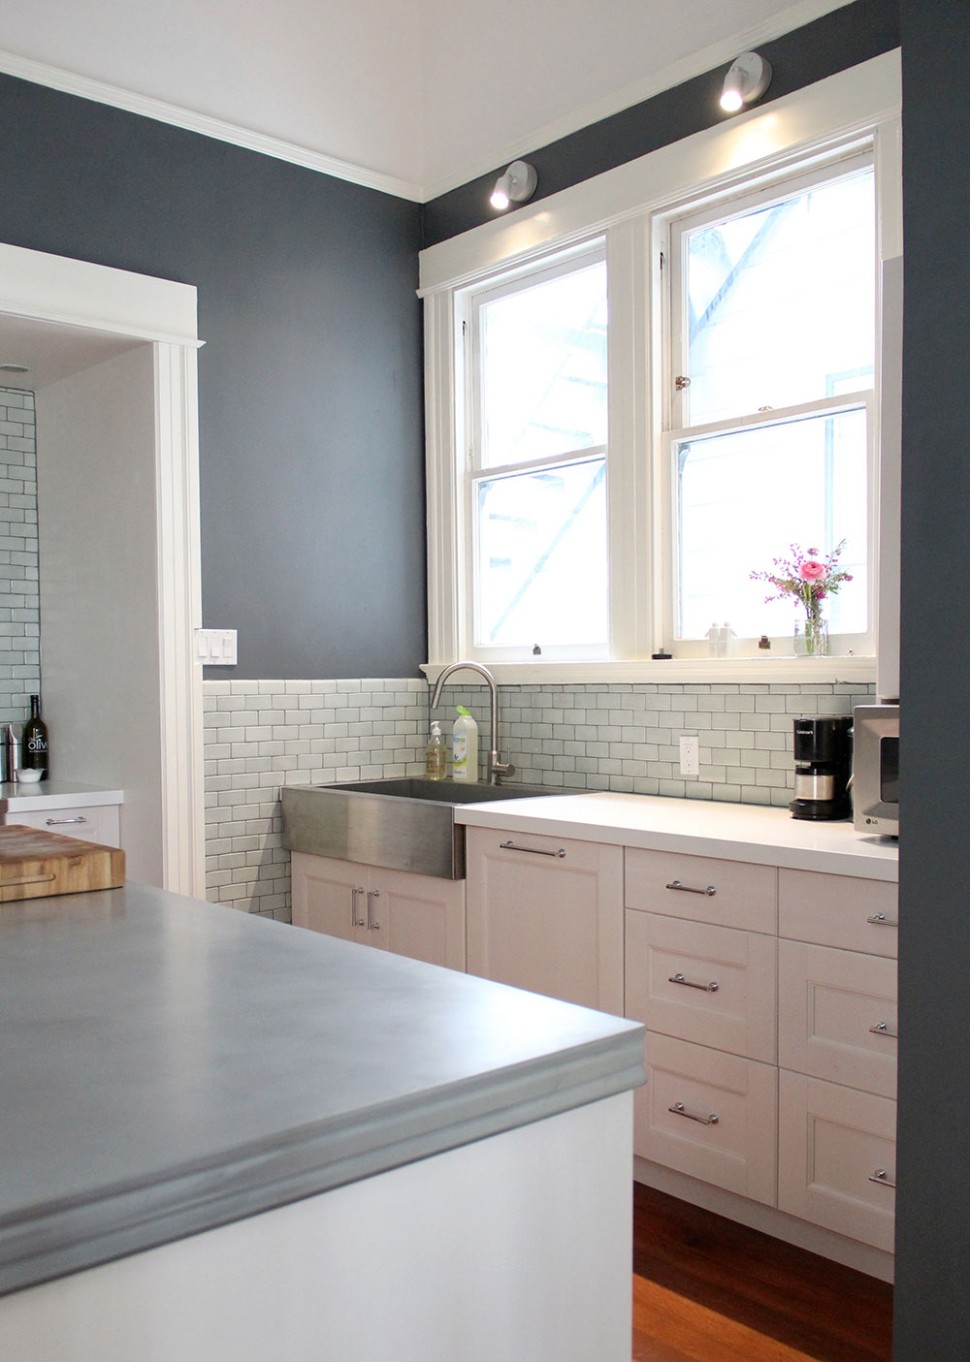 5 Gorgeous Gray Kitchen Ideas - How to Use Gray in Kitchens  - grey kitchens walls